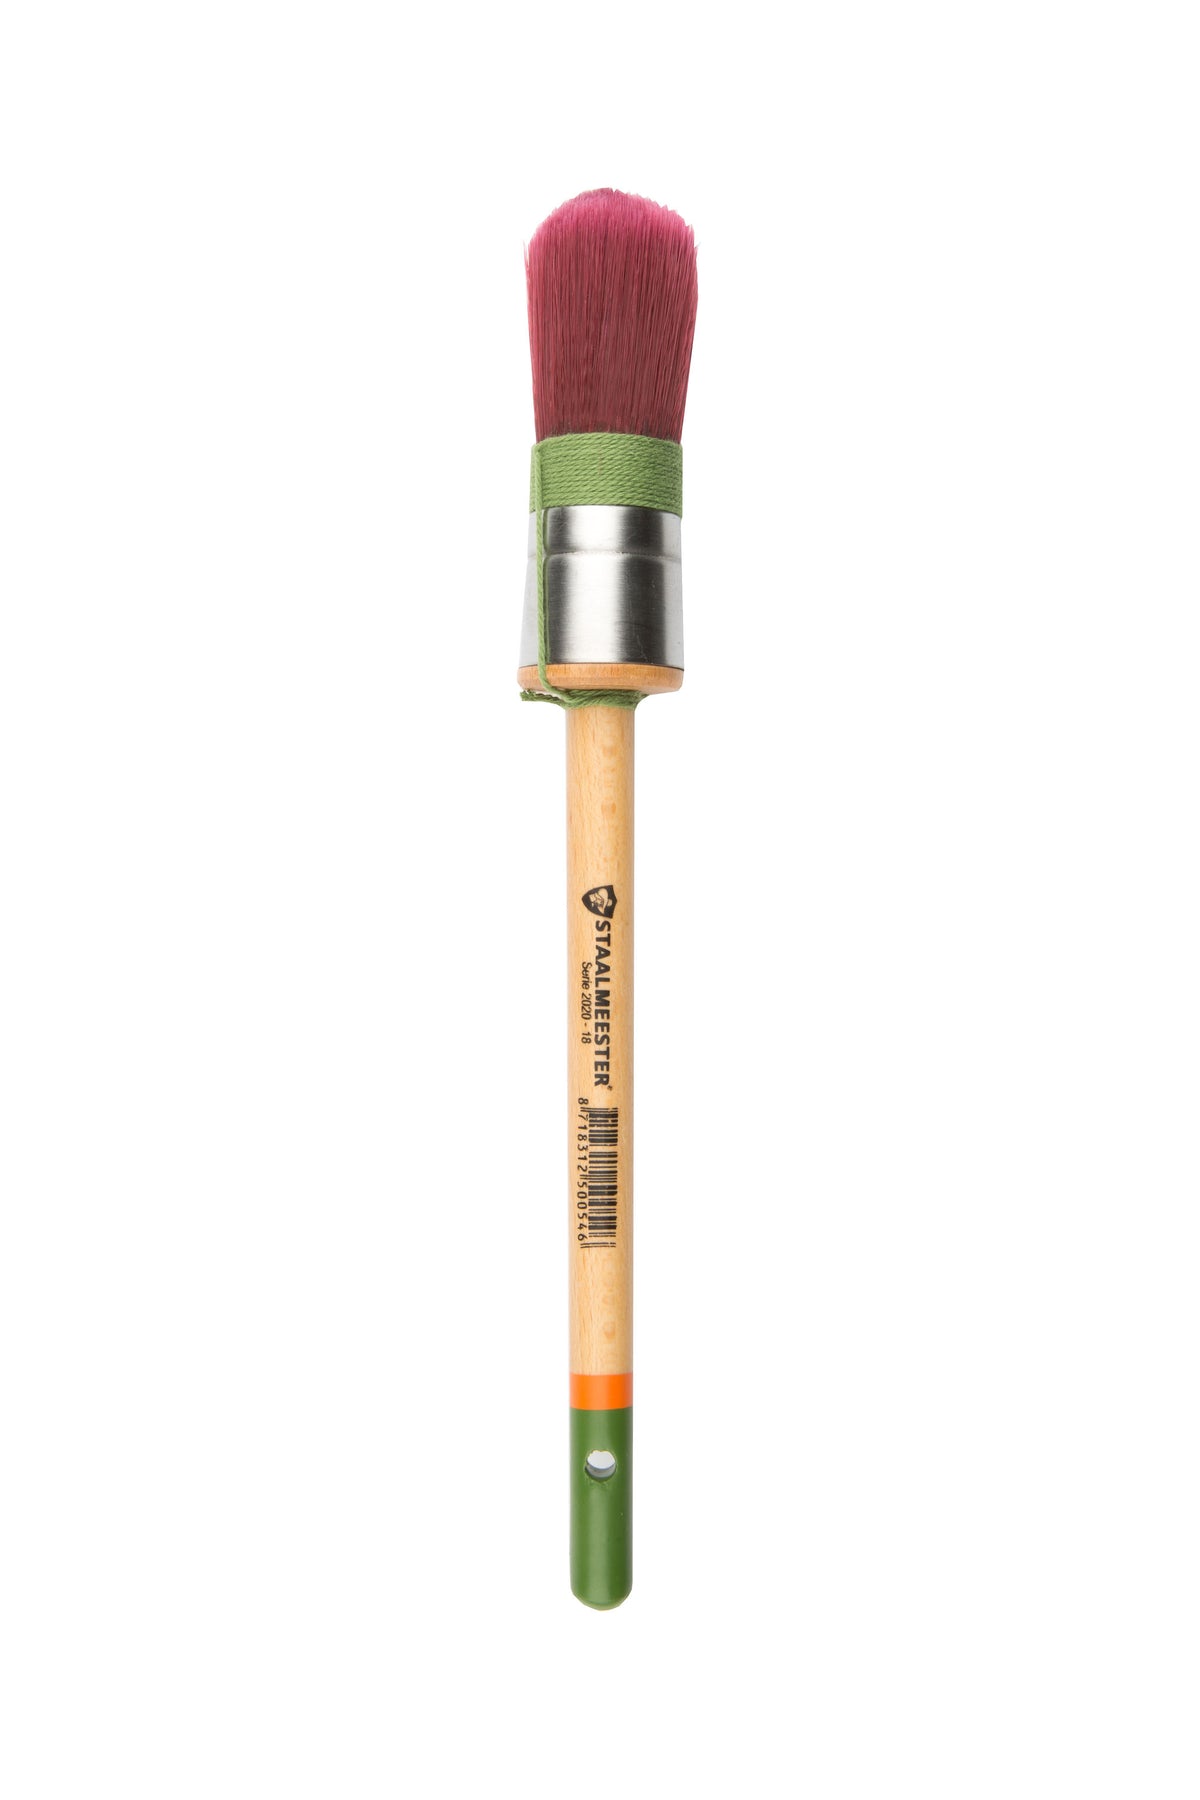 Staalmeester Brushes-Round Synthetic #18